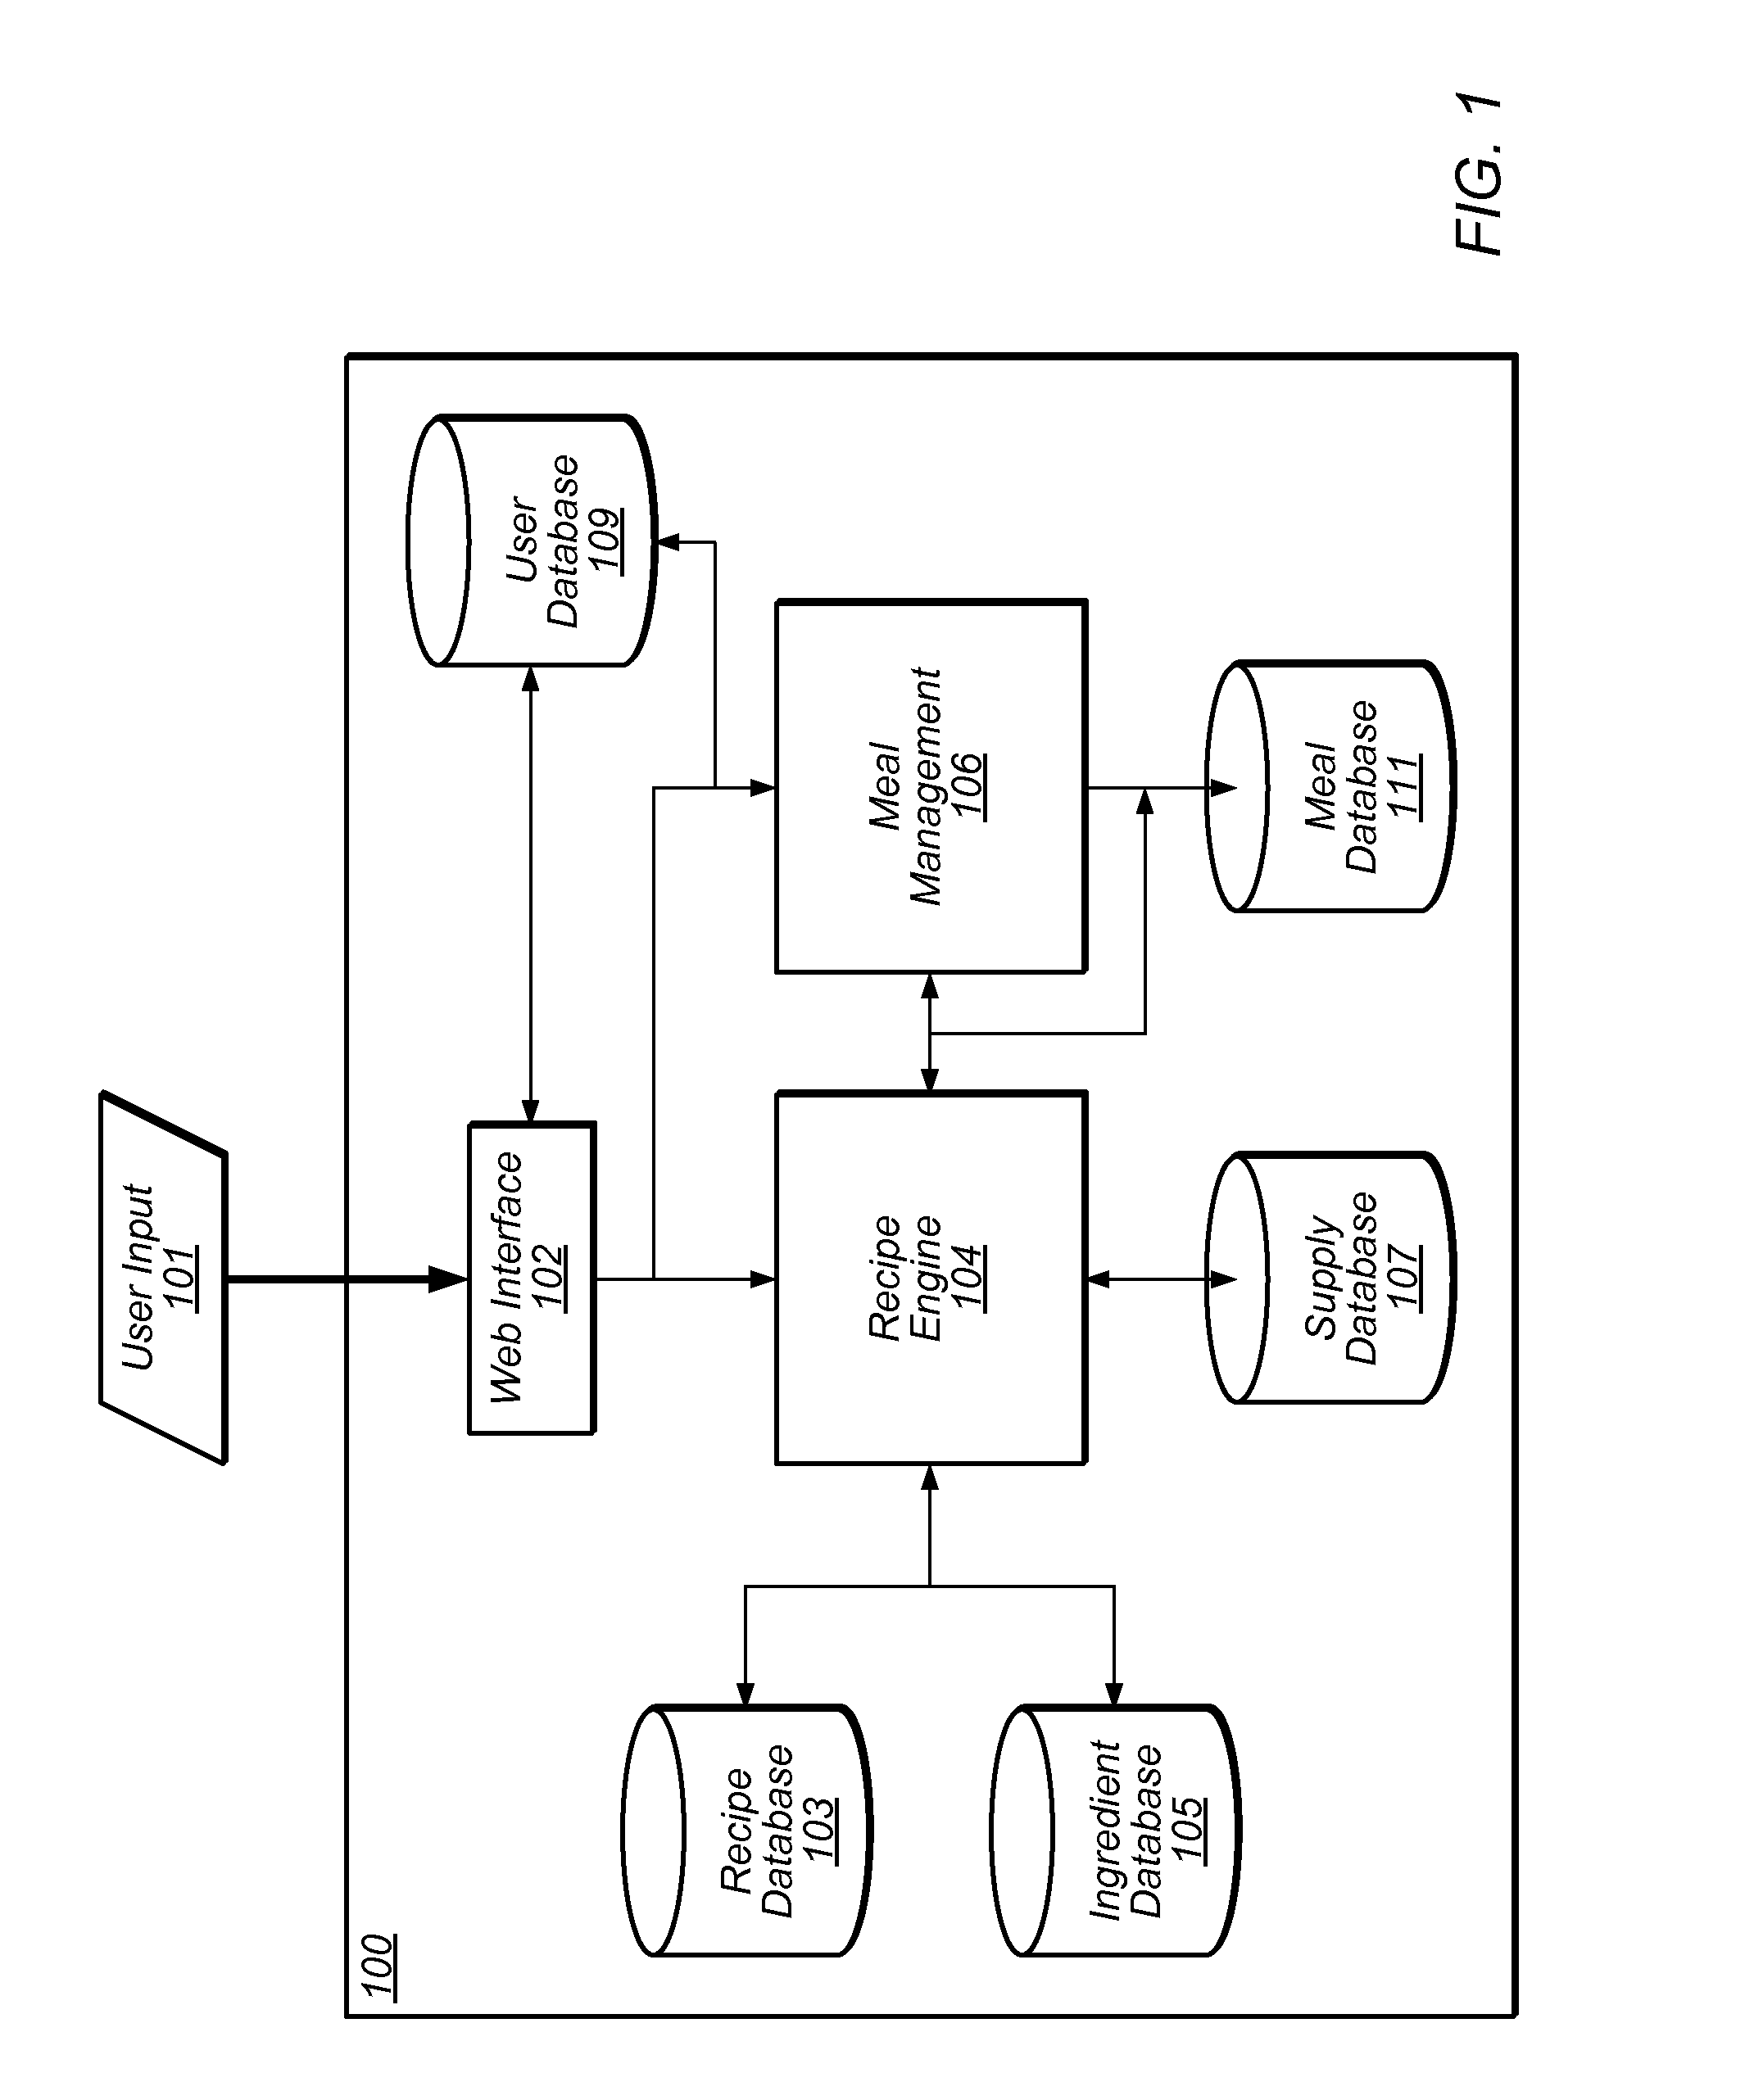 System and Method for Determining Time and Sequence in Meal Preparation